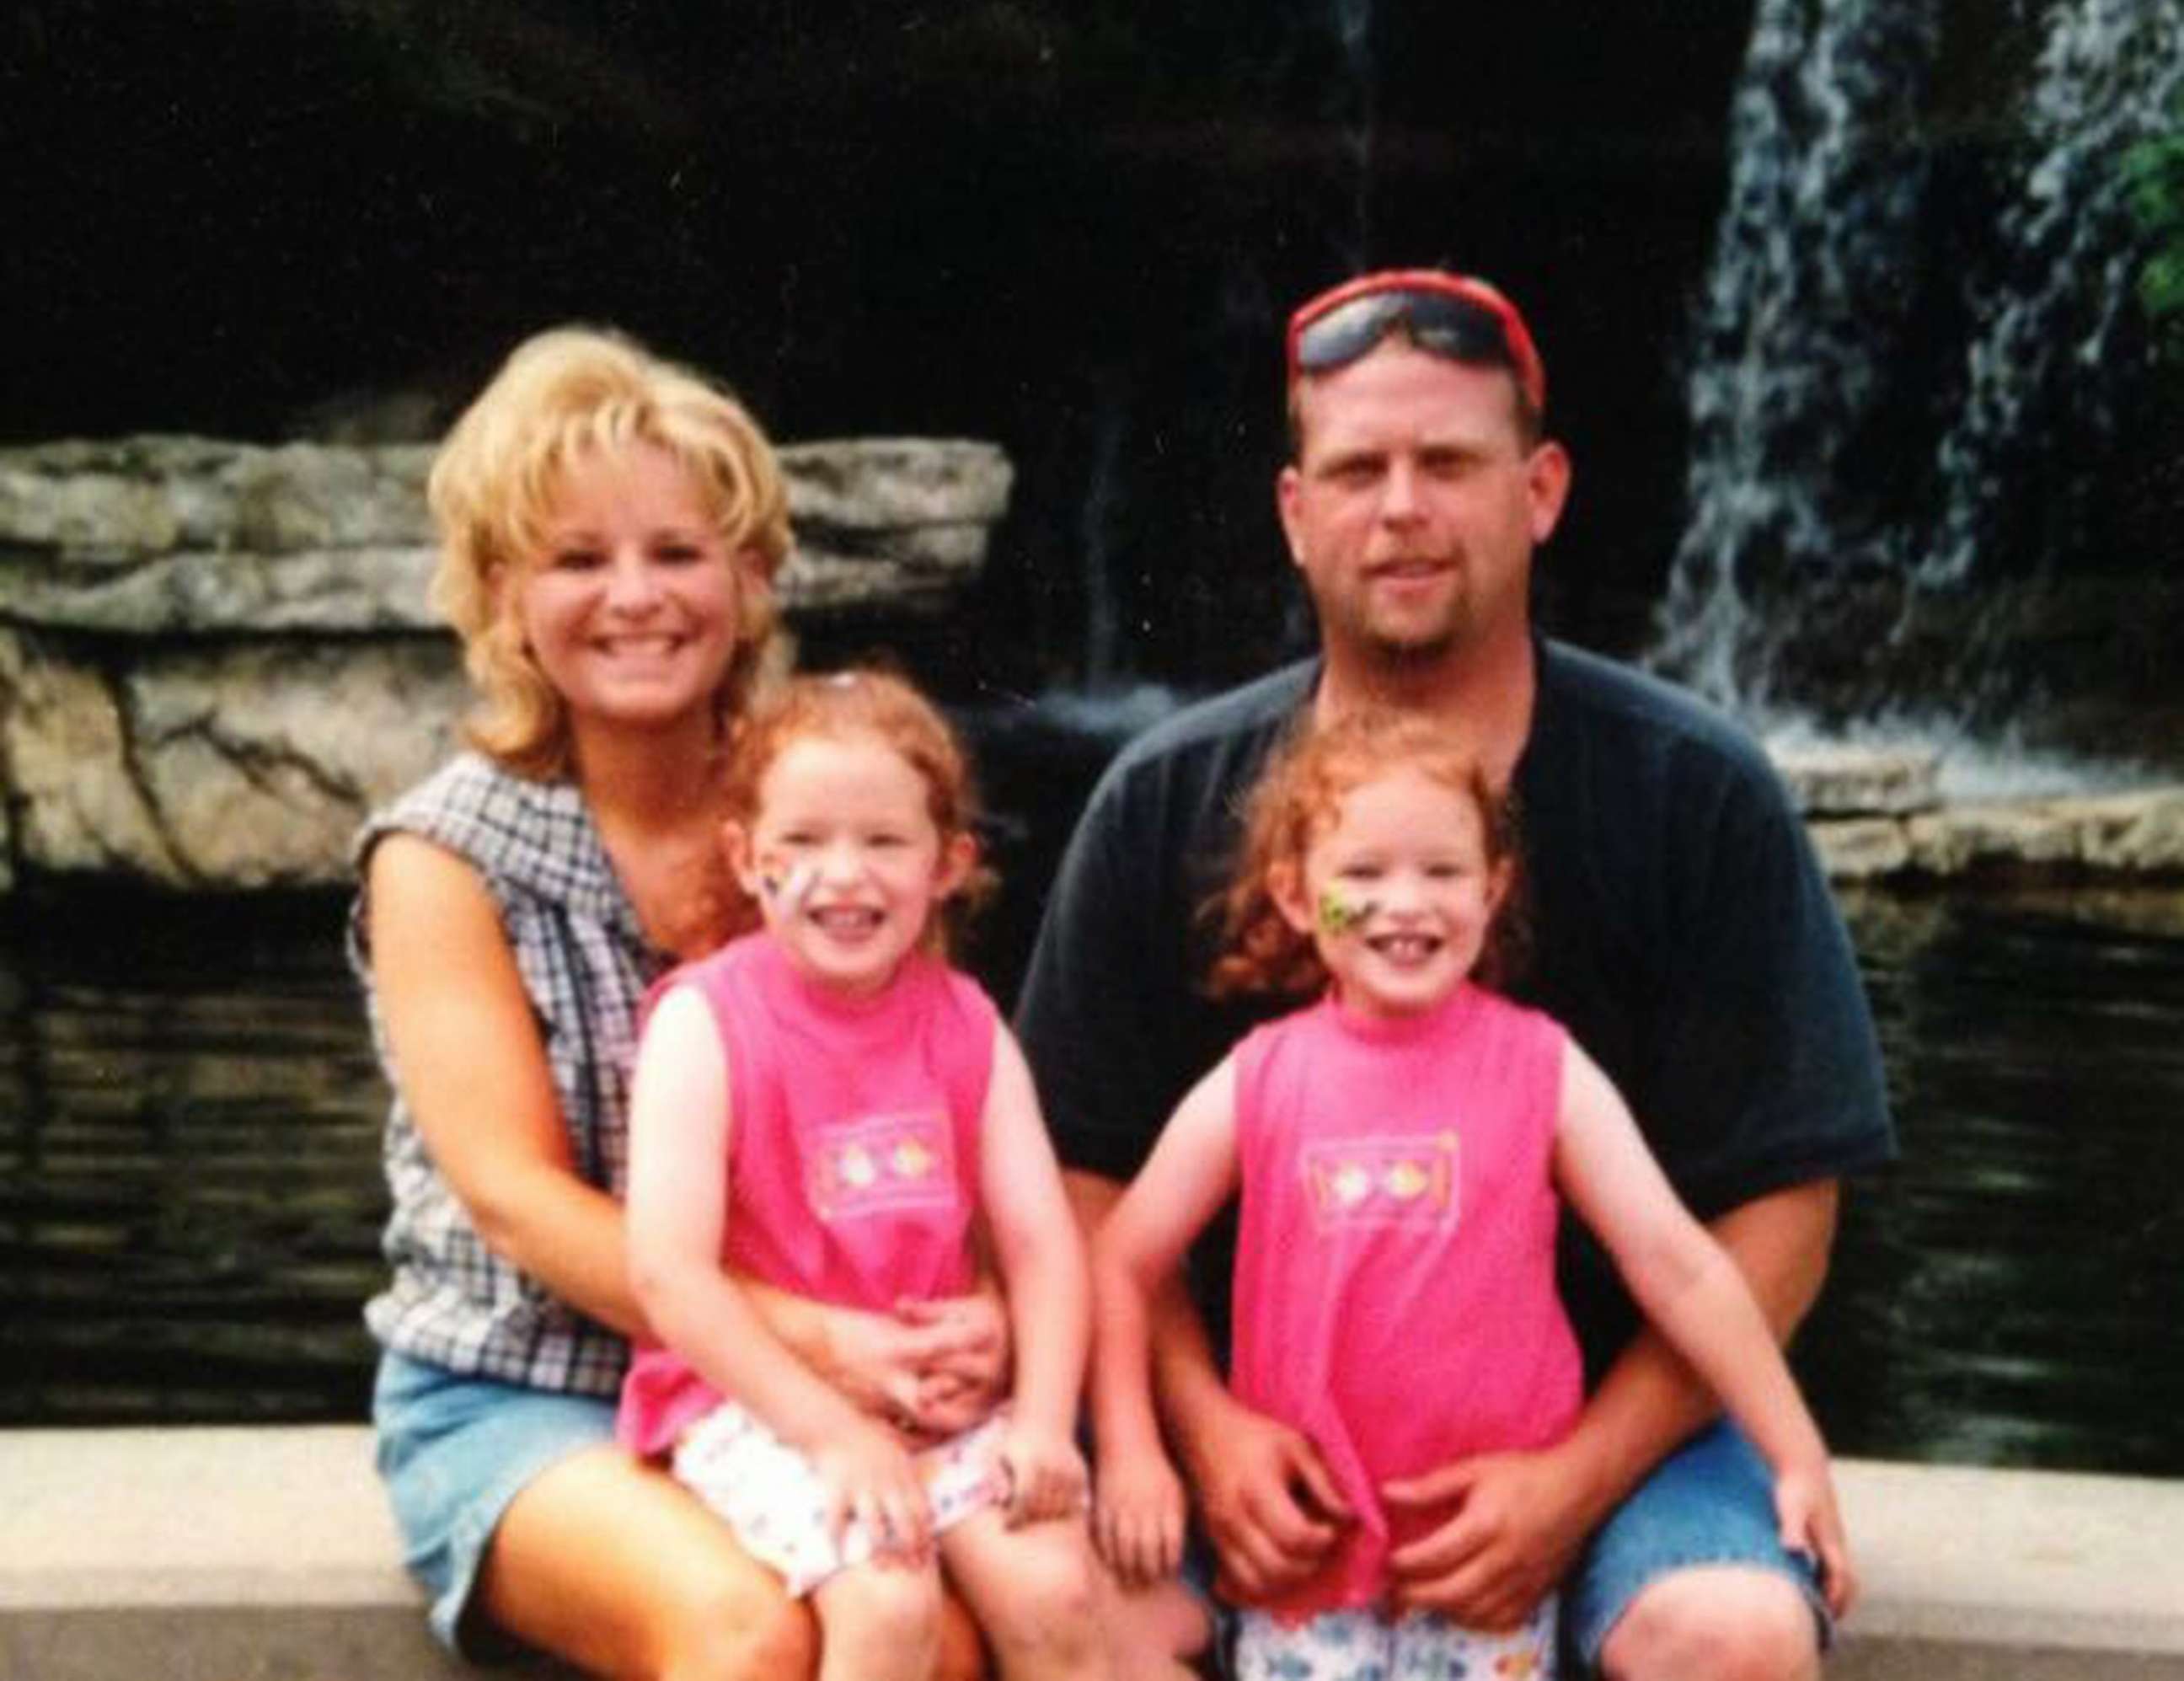 PHOTO: Lori and Jeff Hermstad poses for a photo with their daughters Jaci and Alex at the zoo in St. Louis, Mo., circa 1997.